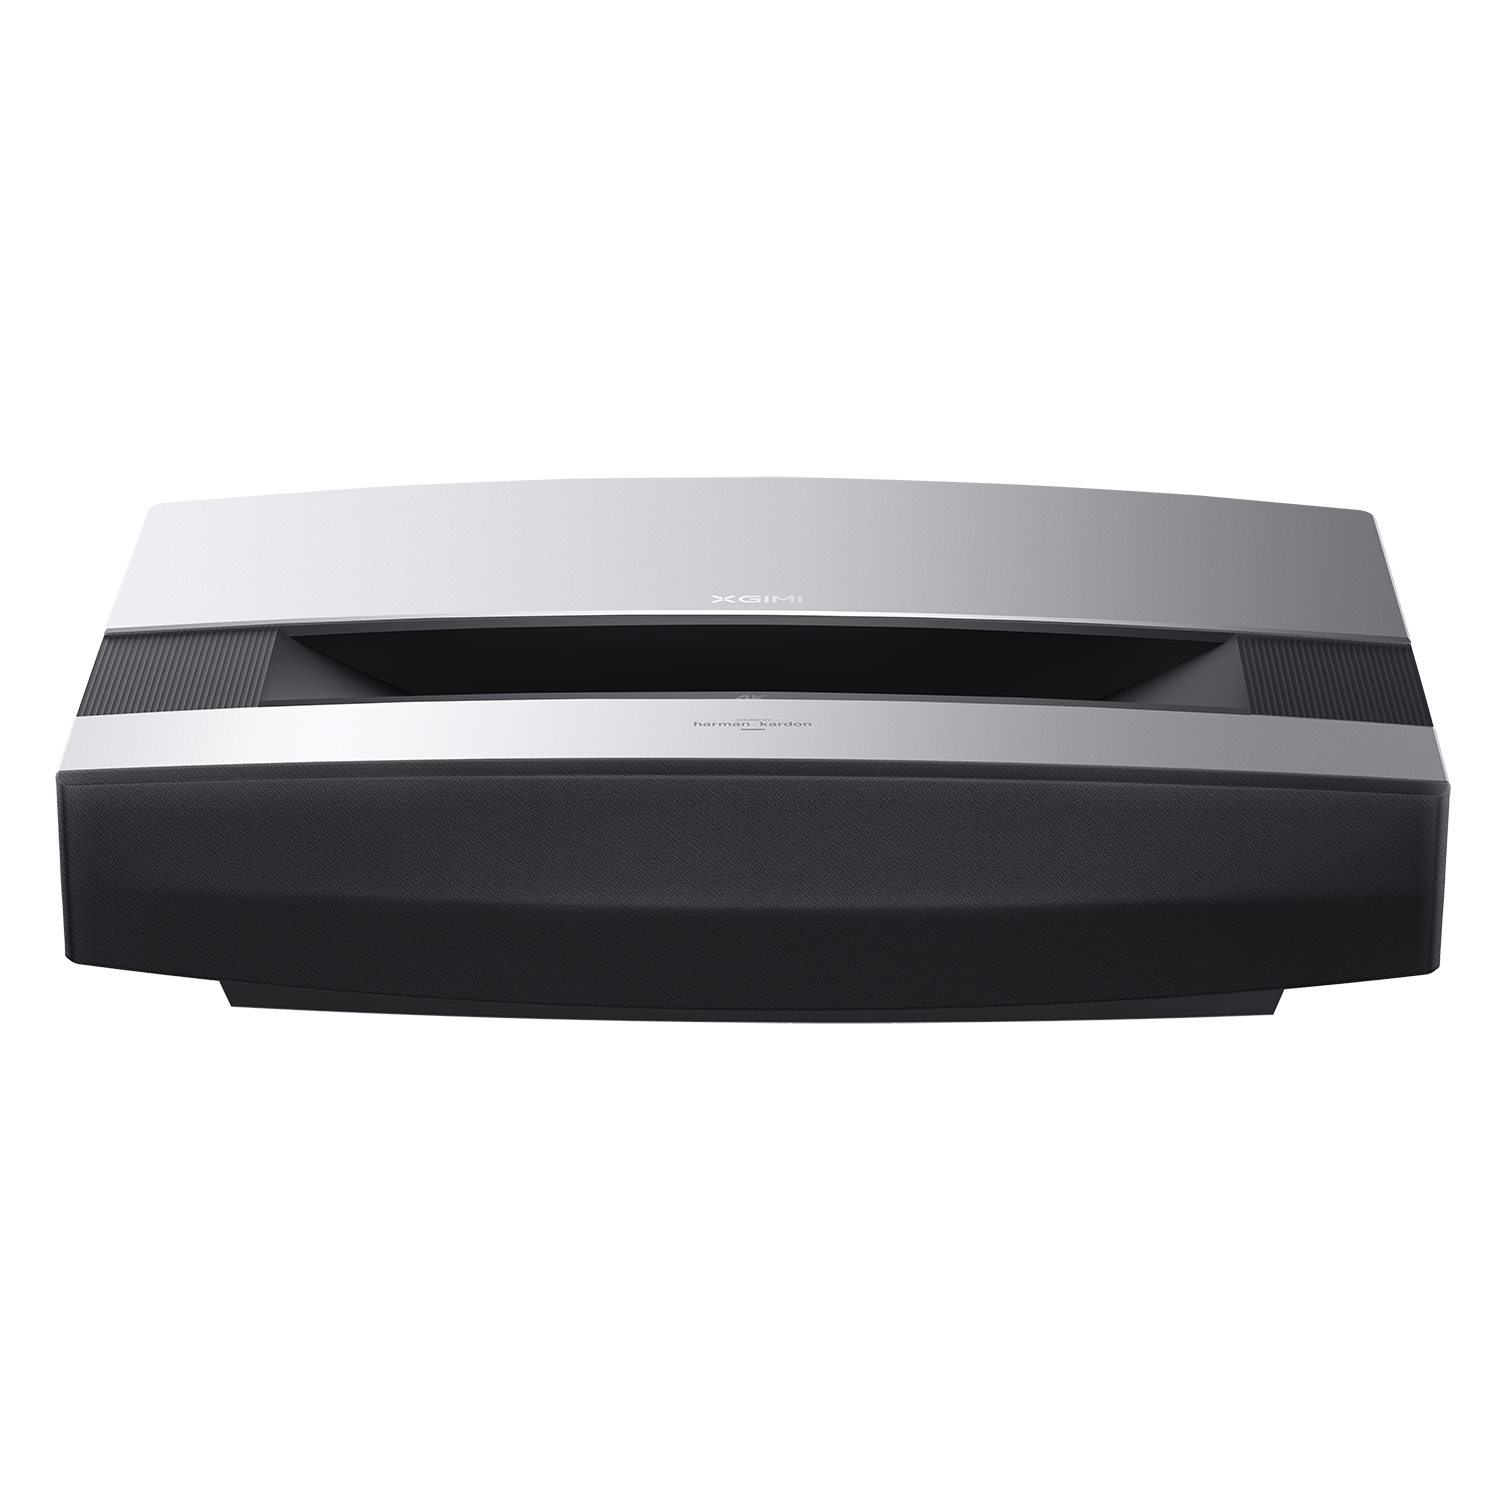 XGIMI Aura 4K UHD Ultra Short Throw Laser Projector, Android TV, 2400 ANSI Lumens, Integrated 60W Harman Kardon Speakers, HDR10, and Home Theater Image Quality